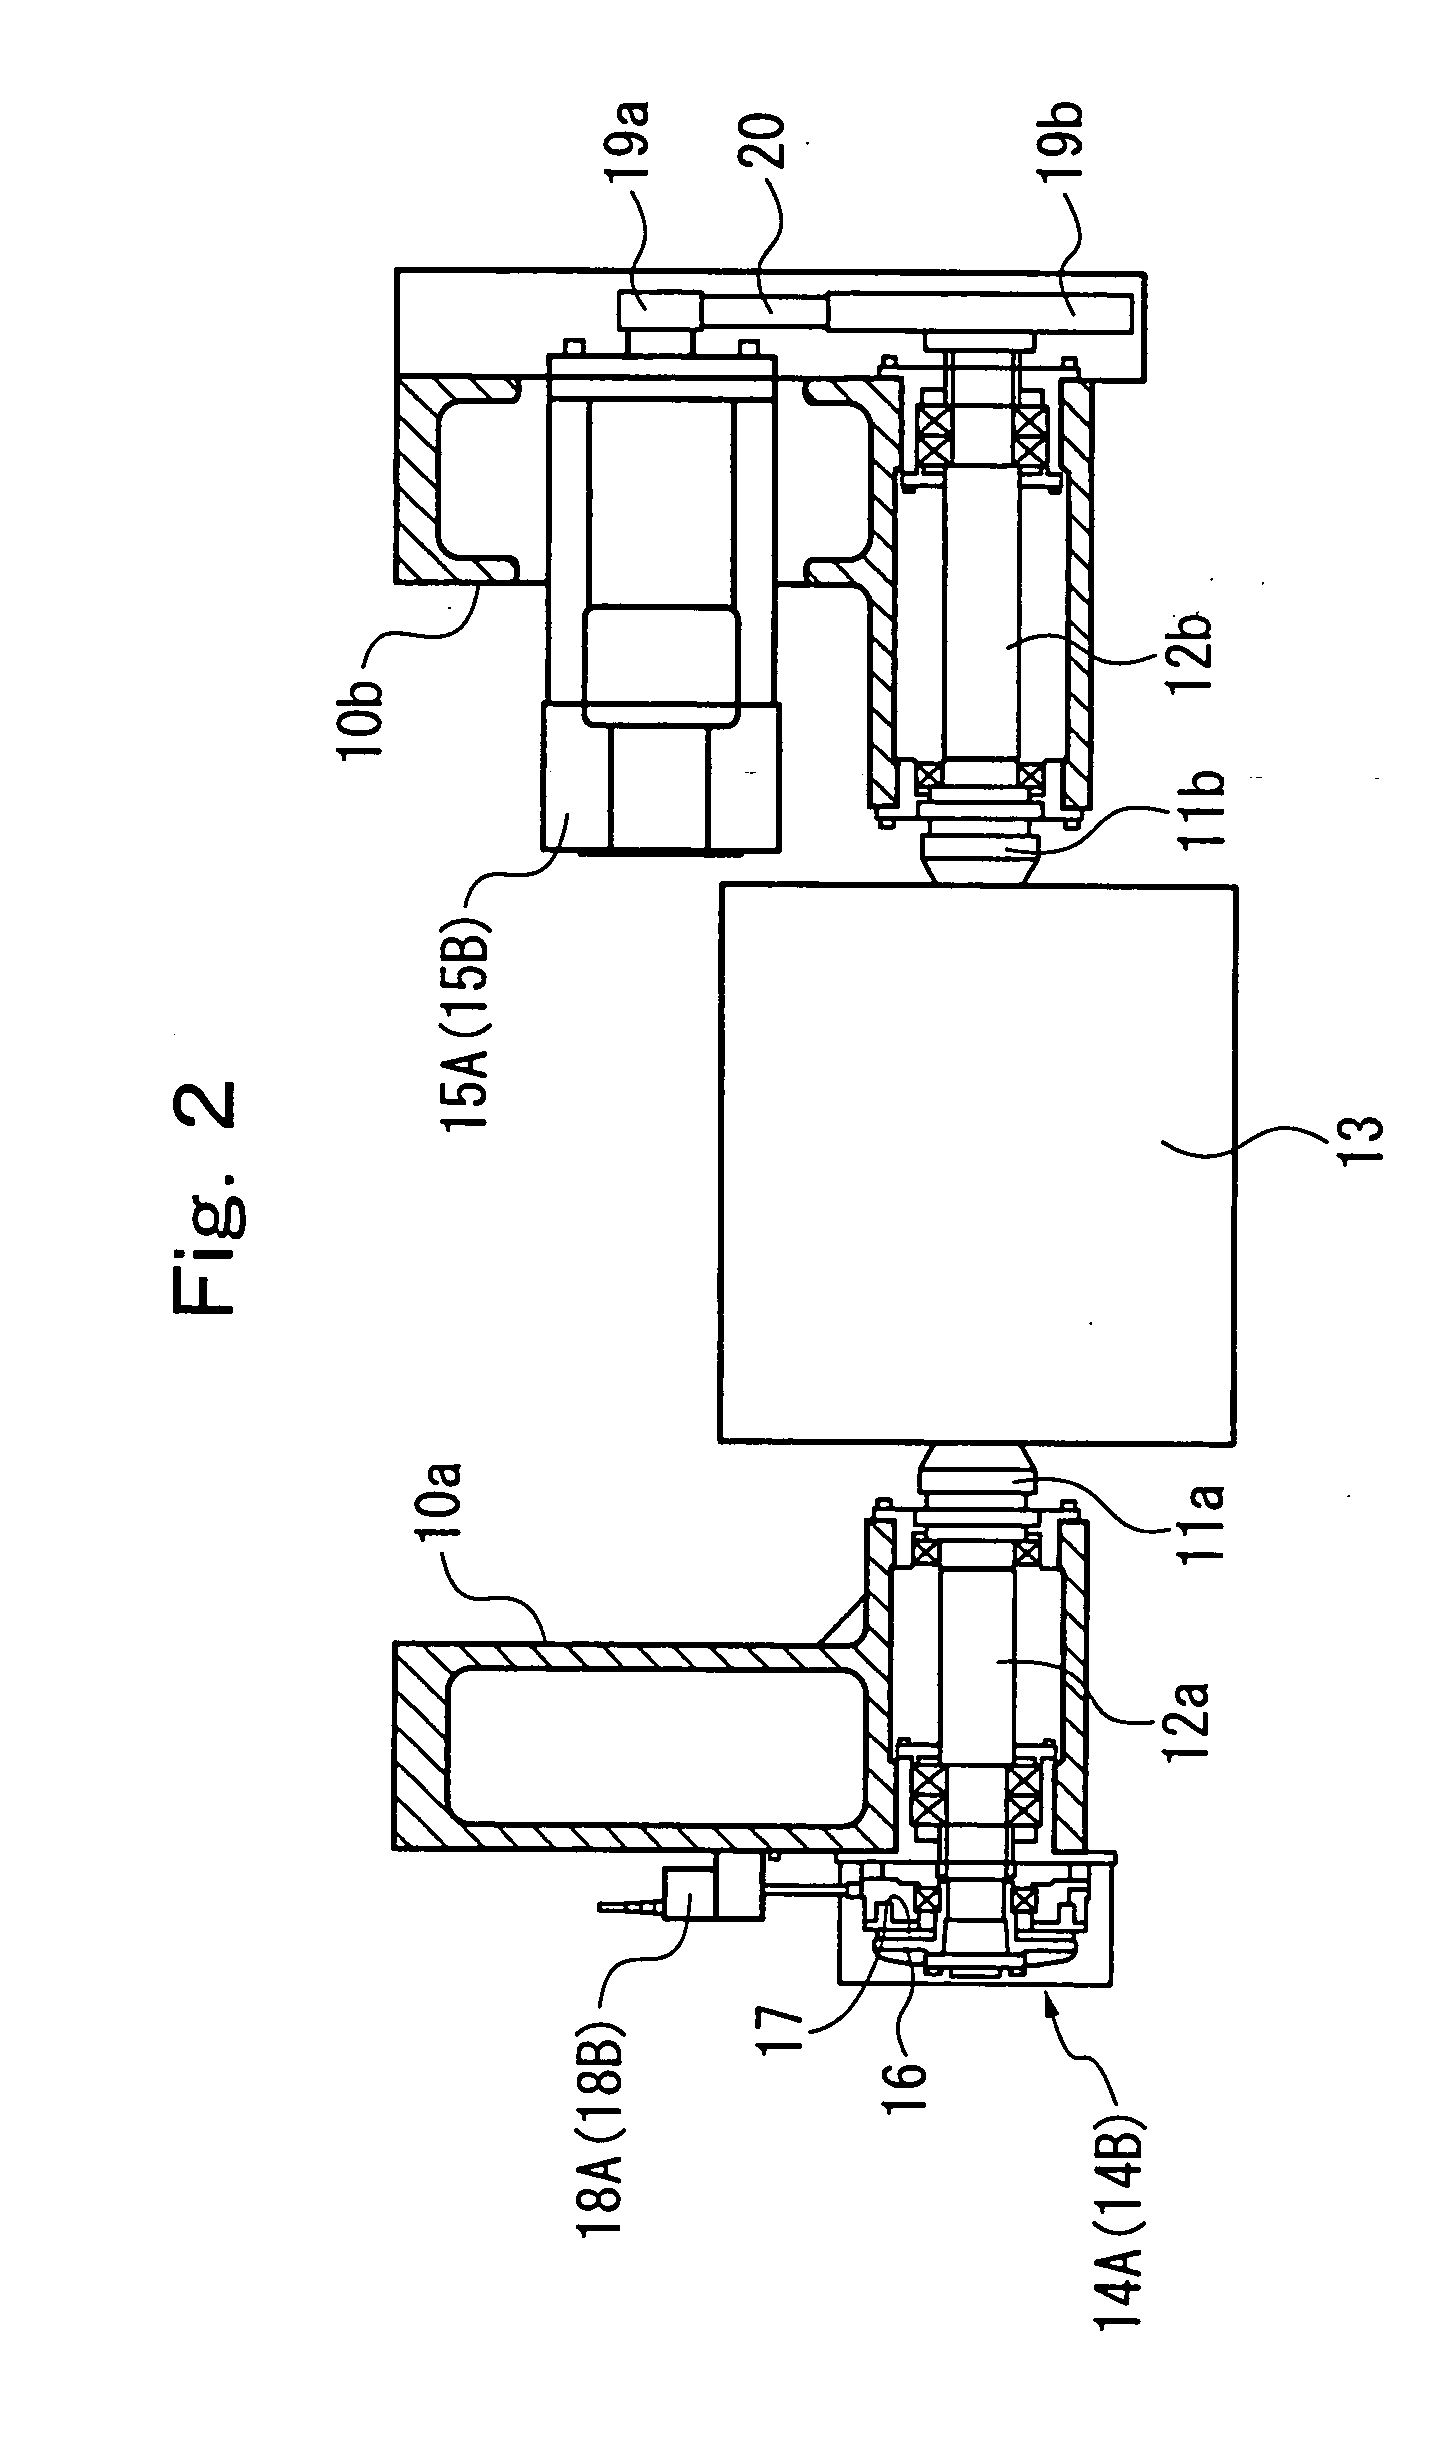 Braking force control method and device for strip-shaped material feeding device